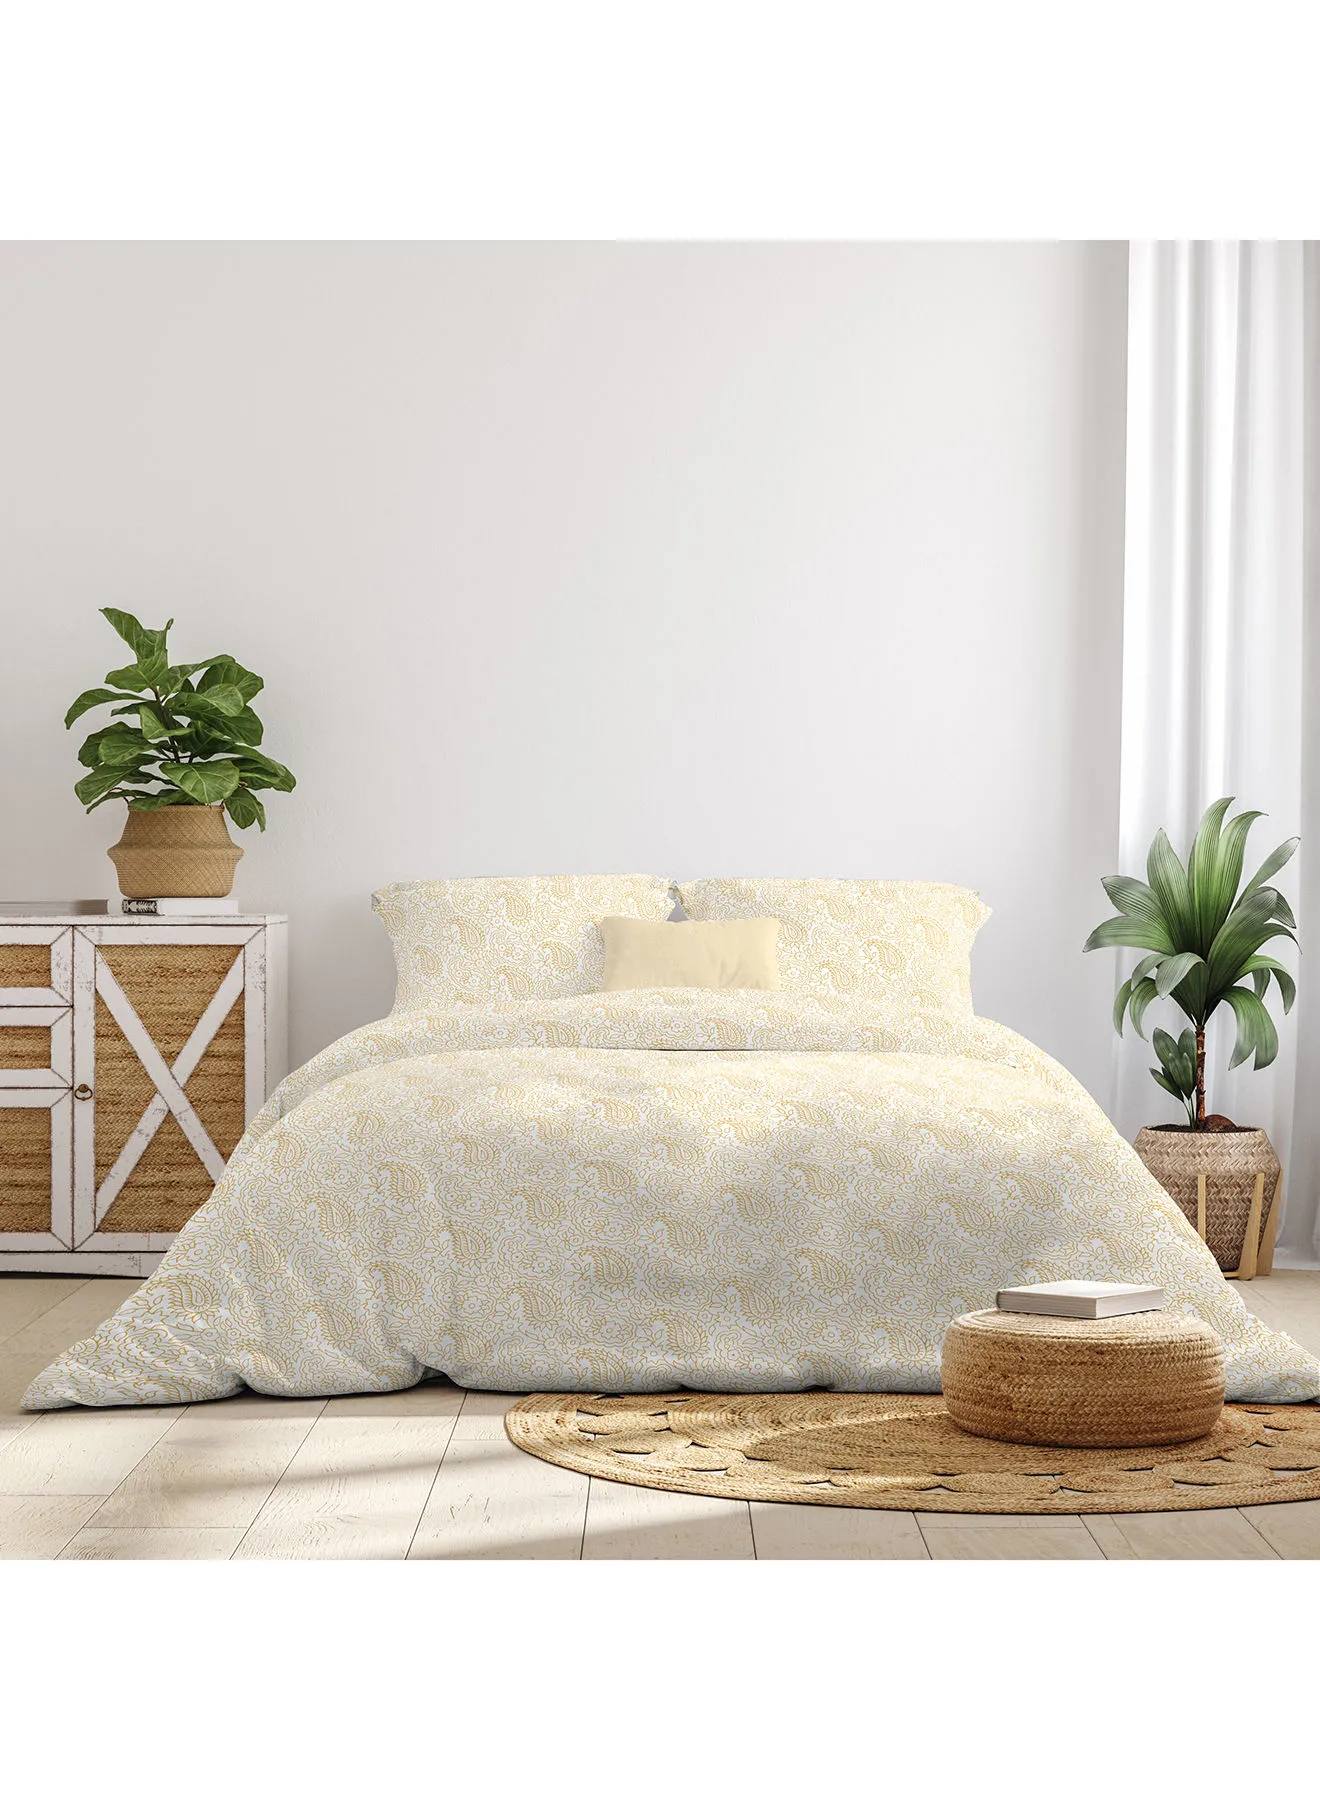 Amal Comforter Set King Size All Season Everyday Use Bedding Set 100% Cotton 3 Pieces 1 Comforter 2 Pillow Covers  Yellow